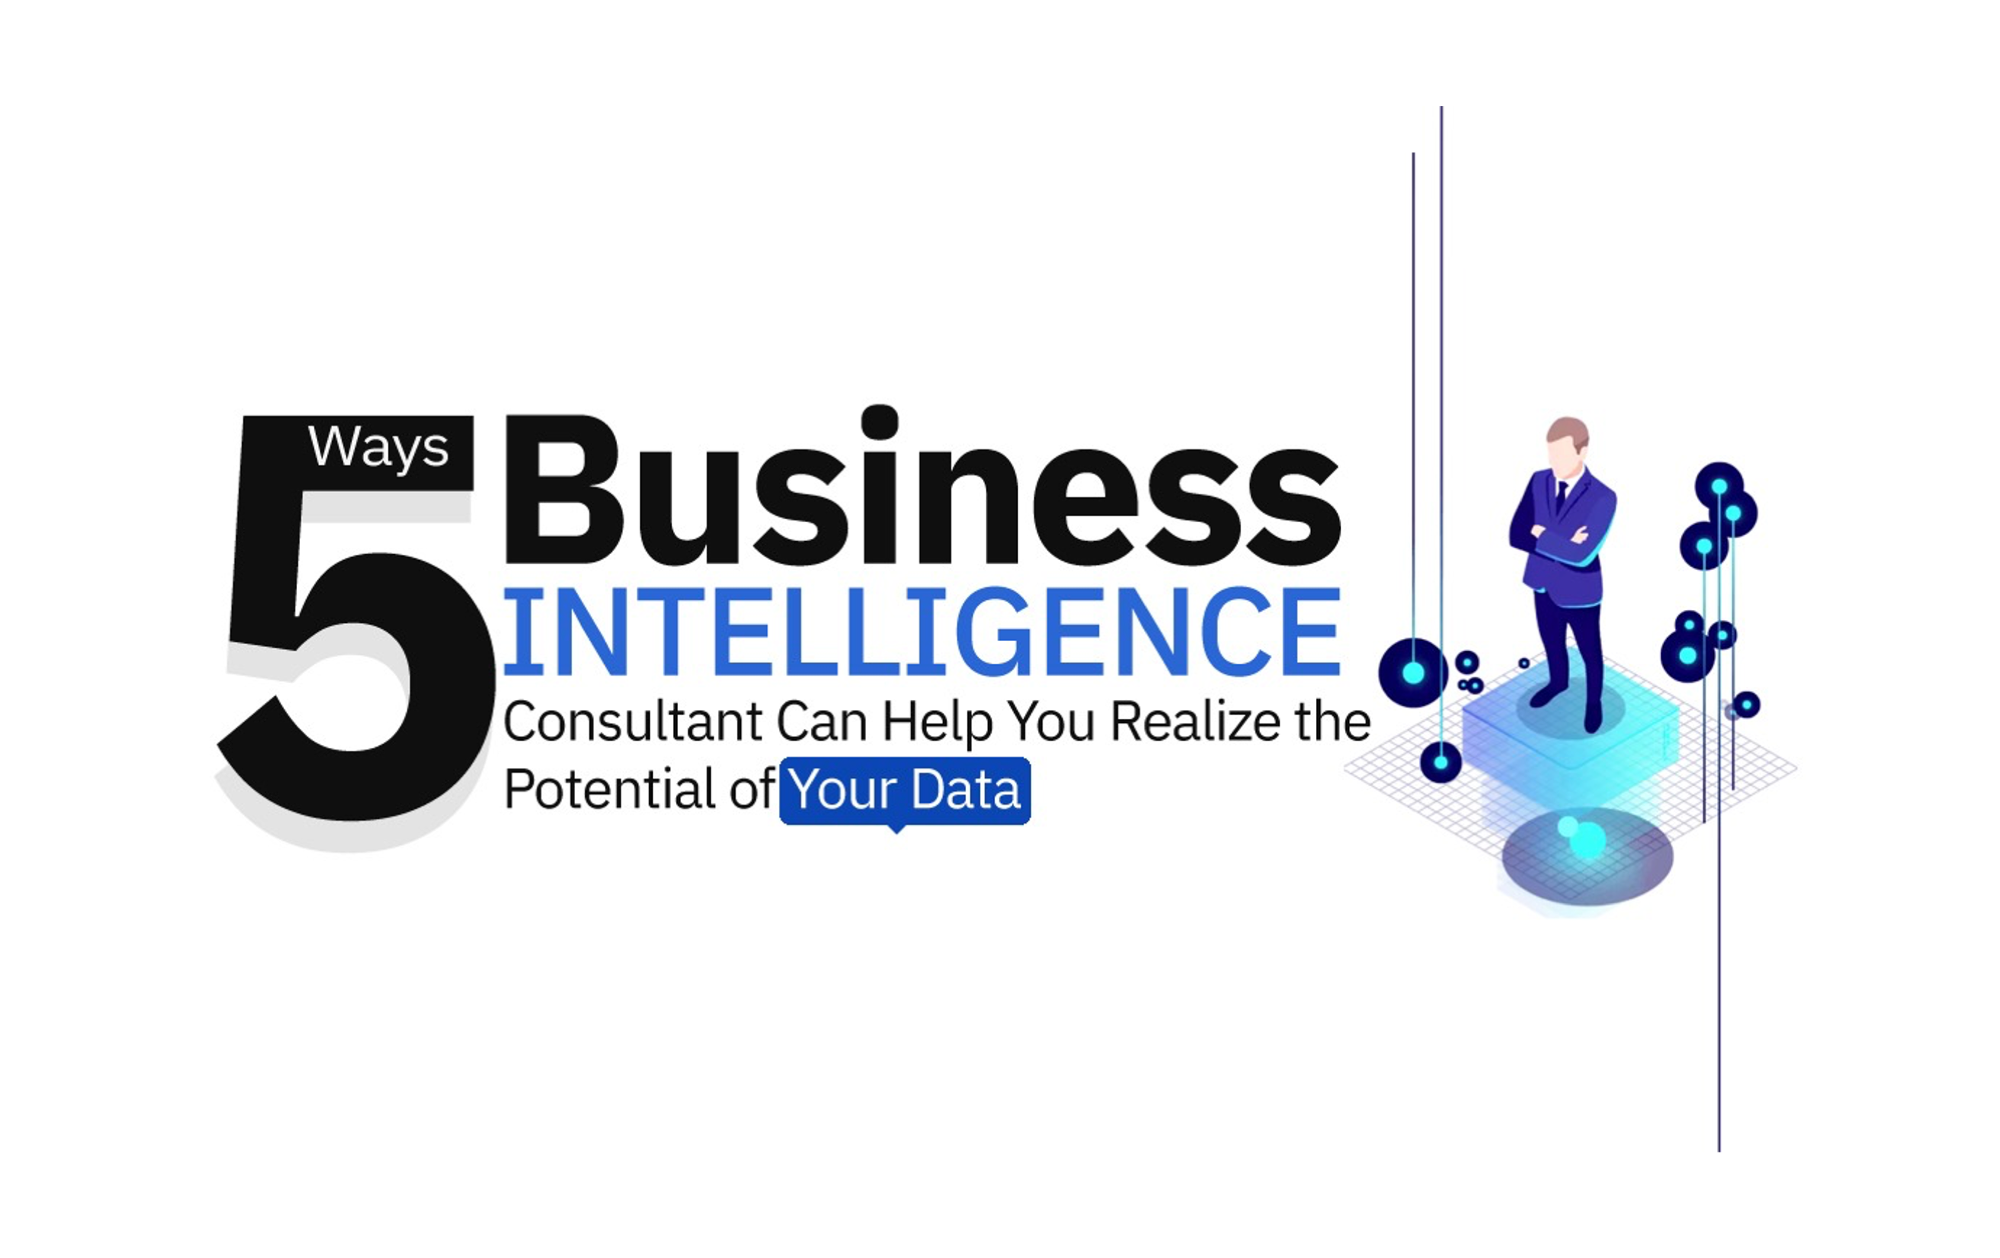 5 Ways Business Intelligence Consultant Can Help You Realize the Potential of Your Data